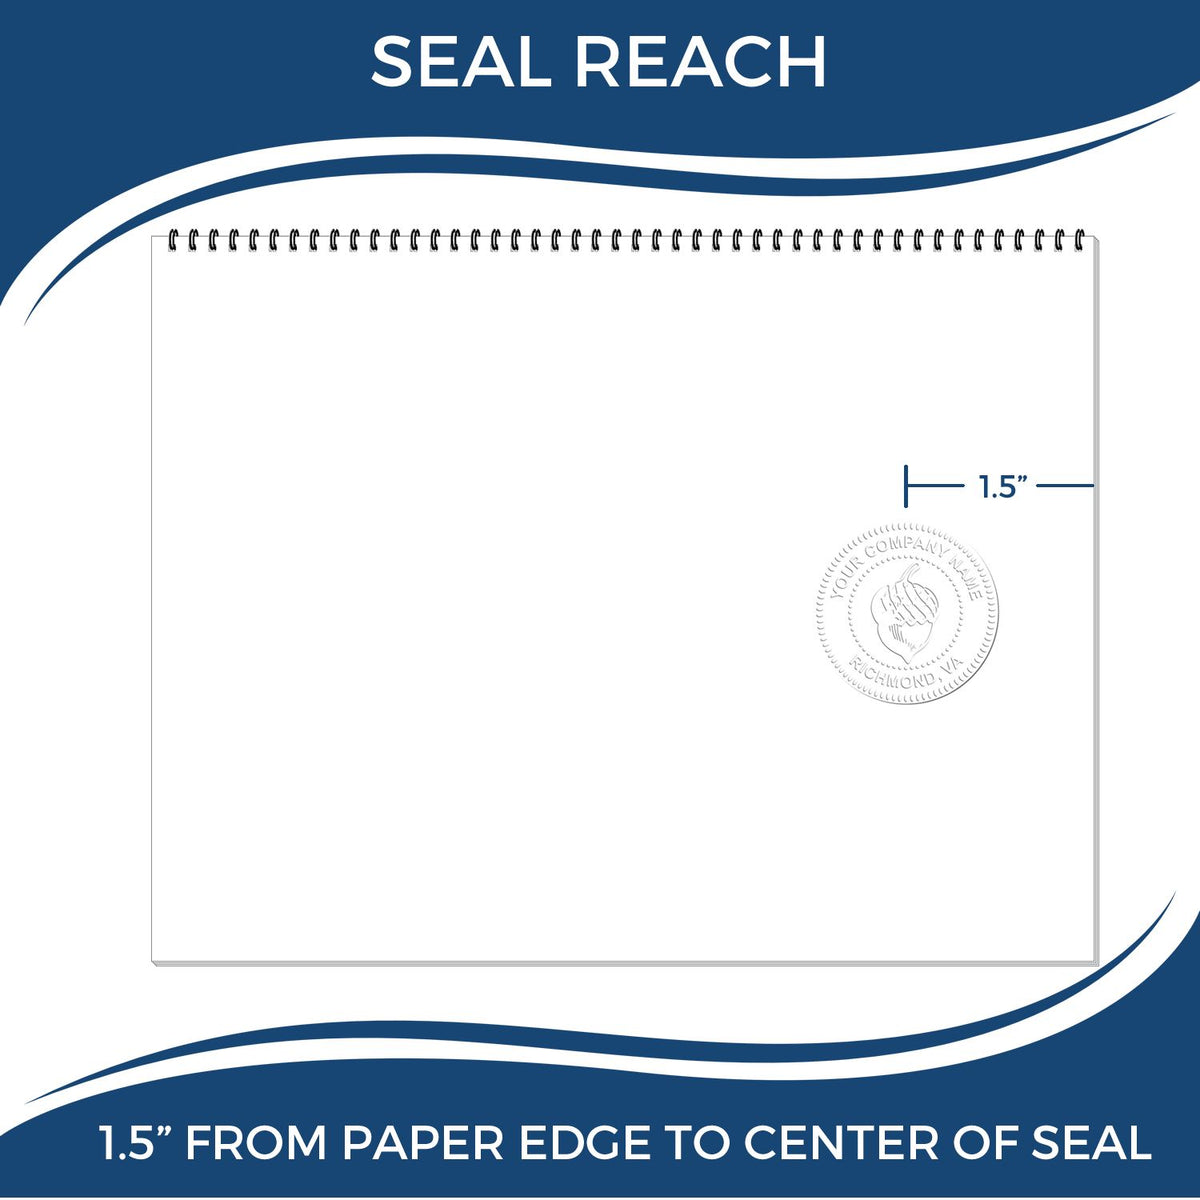 An infographic showing the seal reach which is represented by a ruler and a miniature seal image of the Gift Texas Geologist Seal